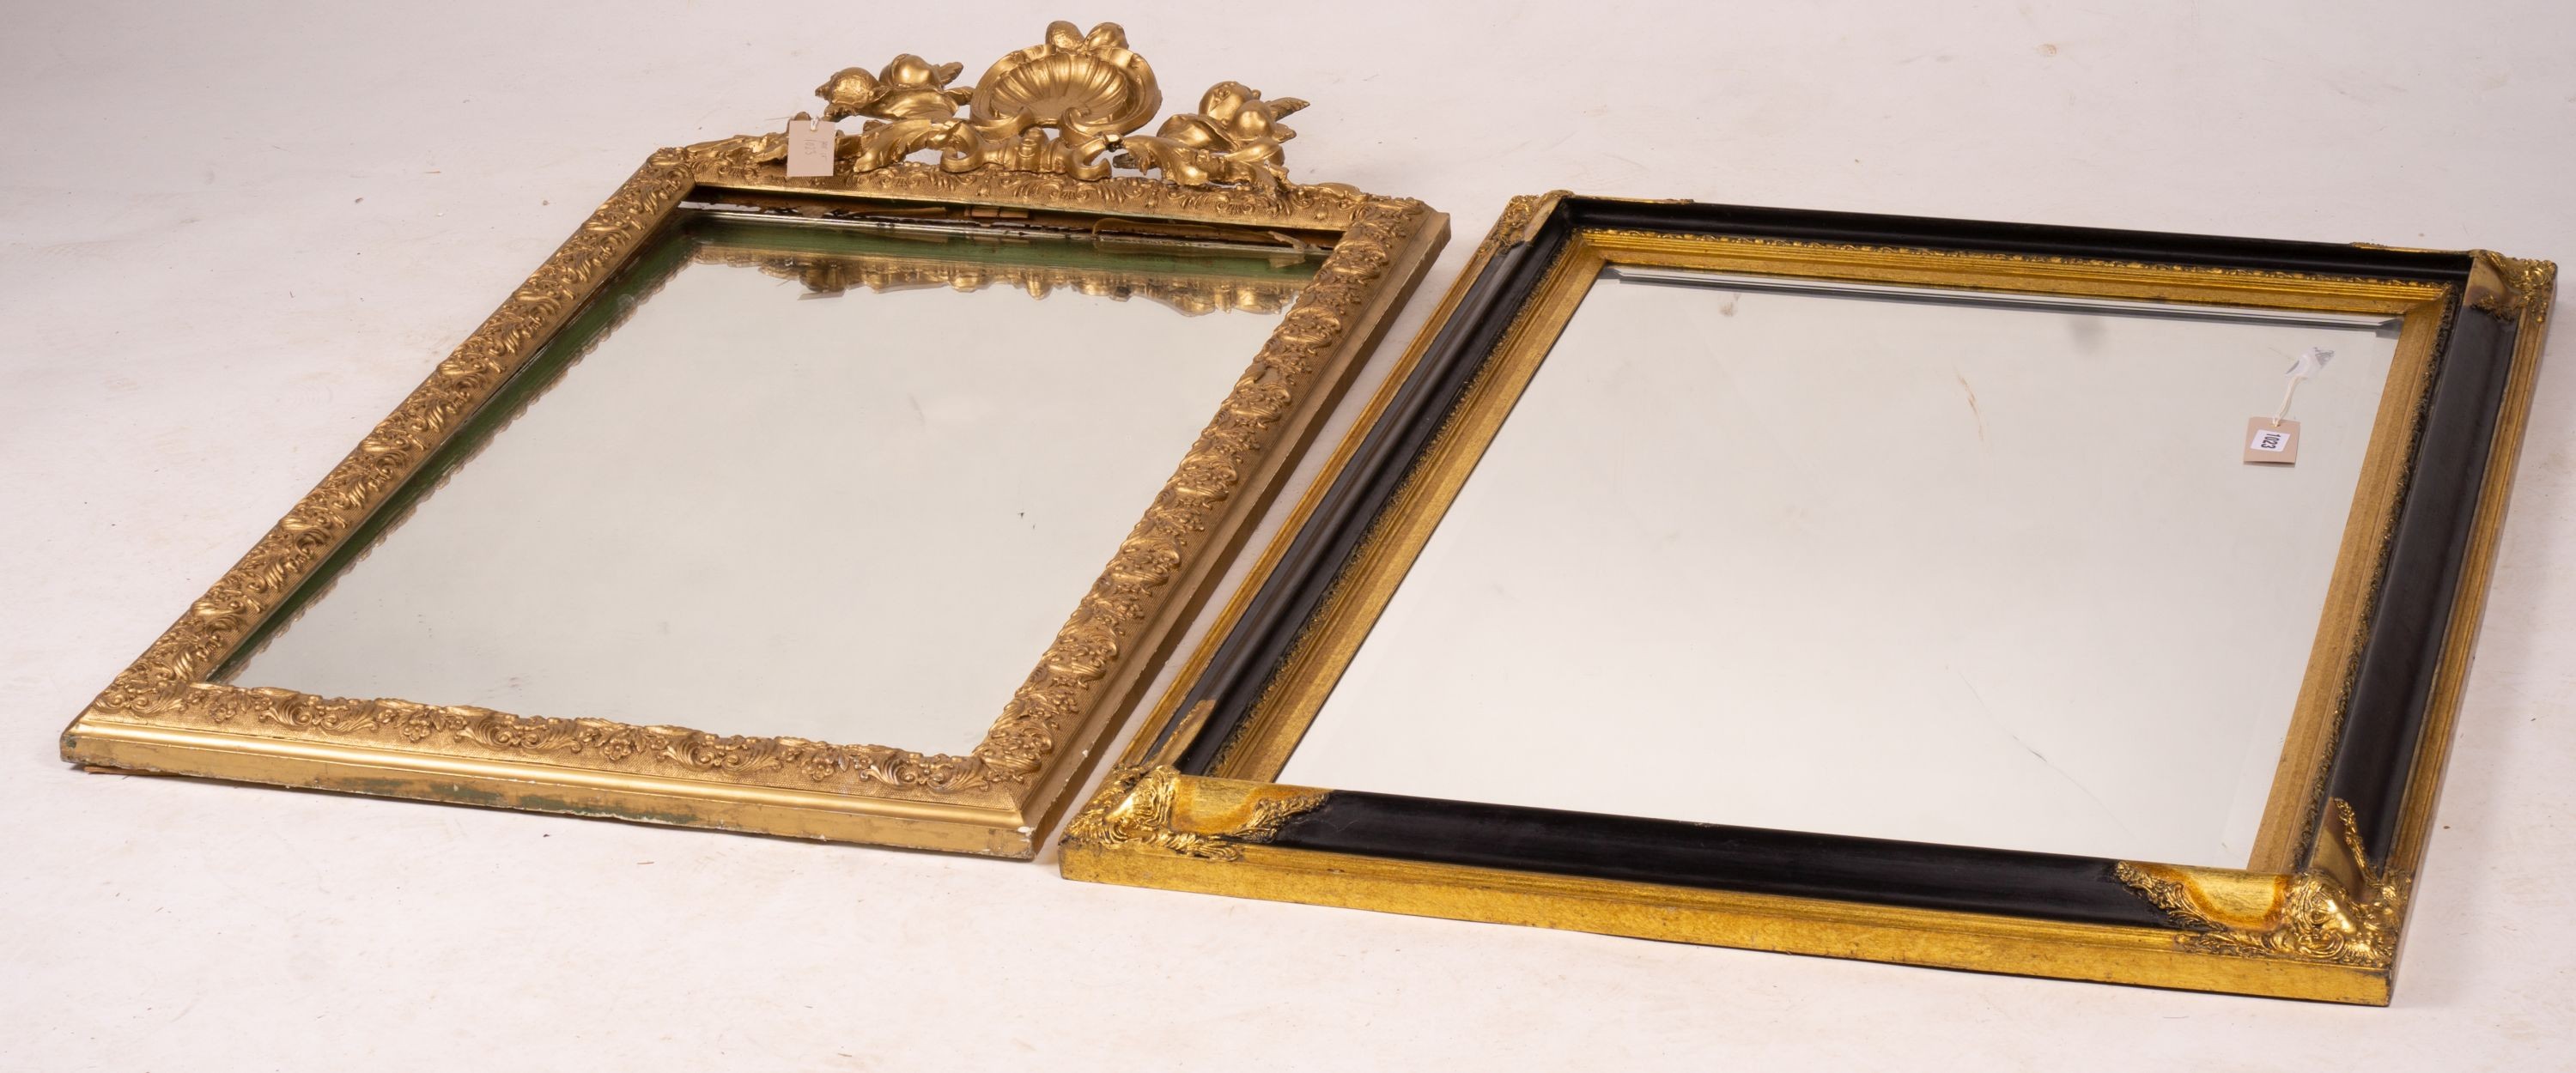 A 19th century French gilt gesso wall mirror, width 64cm, height 116cm together with a modern larger rectangular wall mirror